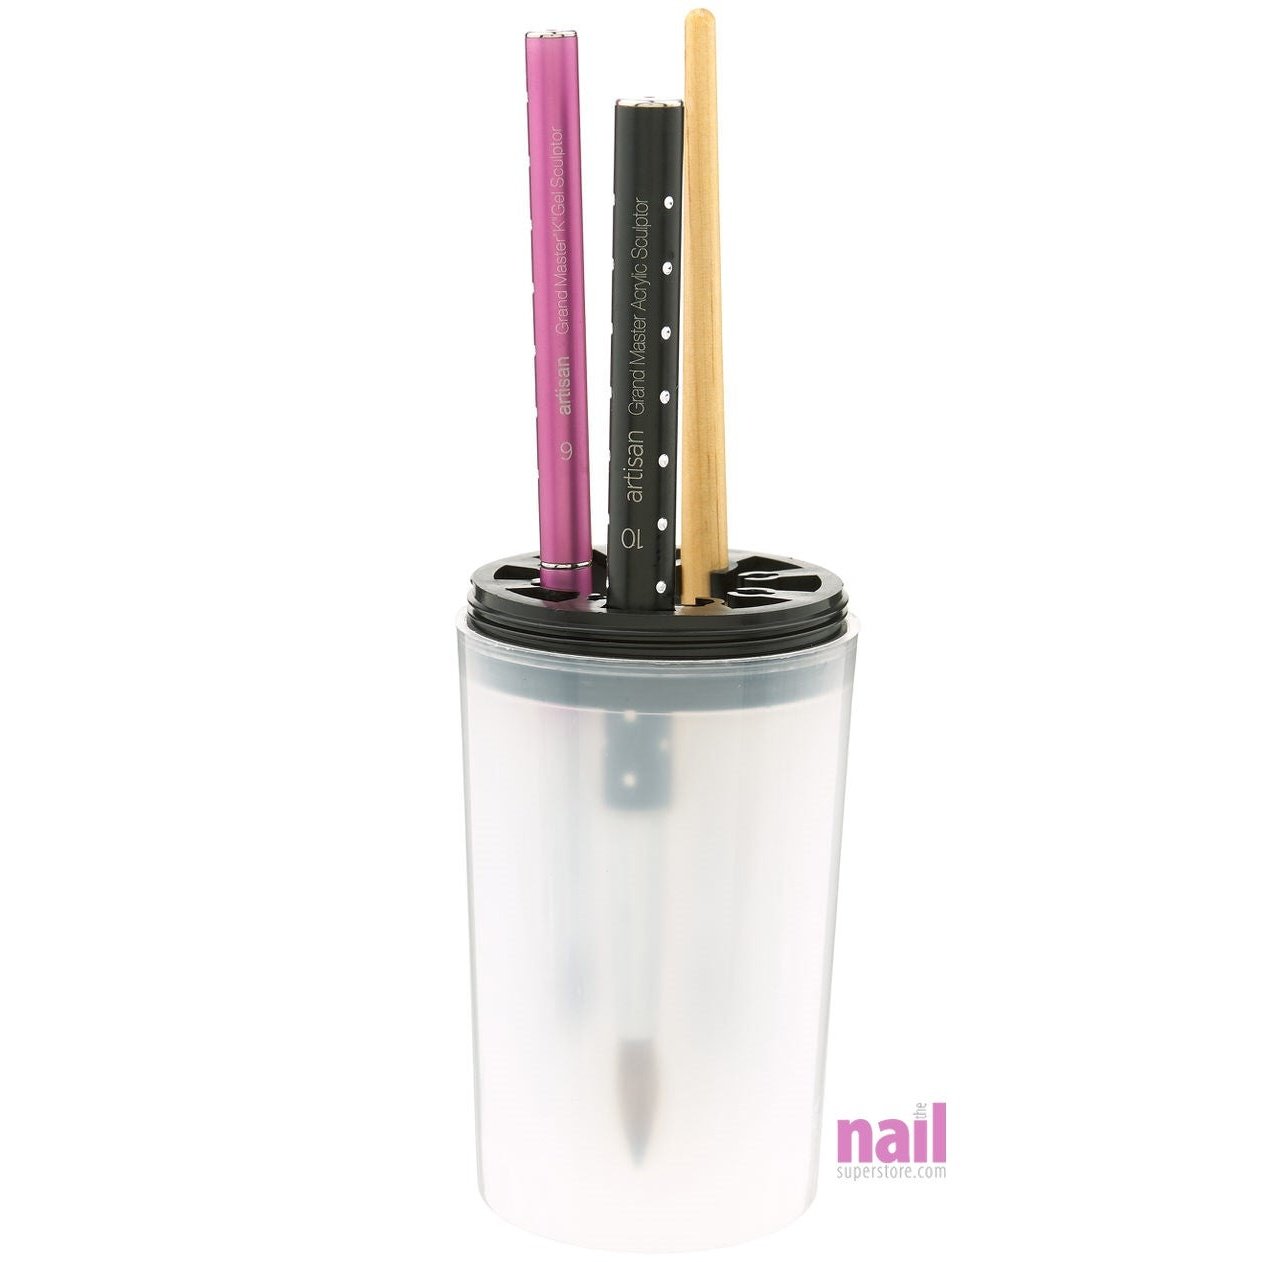 Nail Brush Cleaner Jar | Safely Clean 8 Brushes at Once - Each